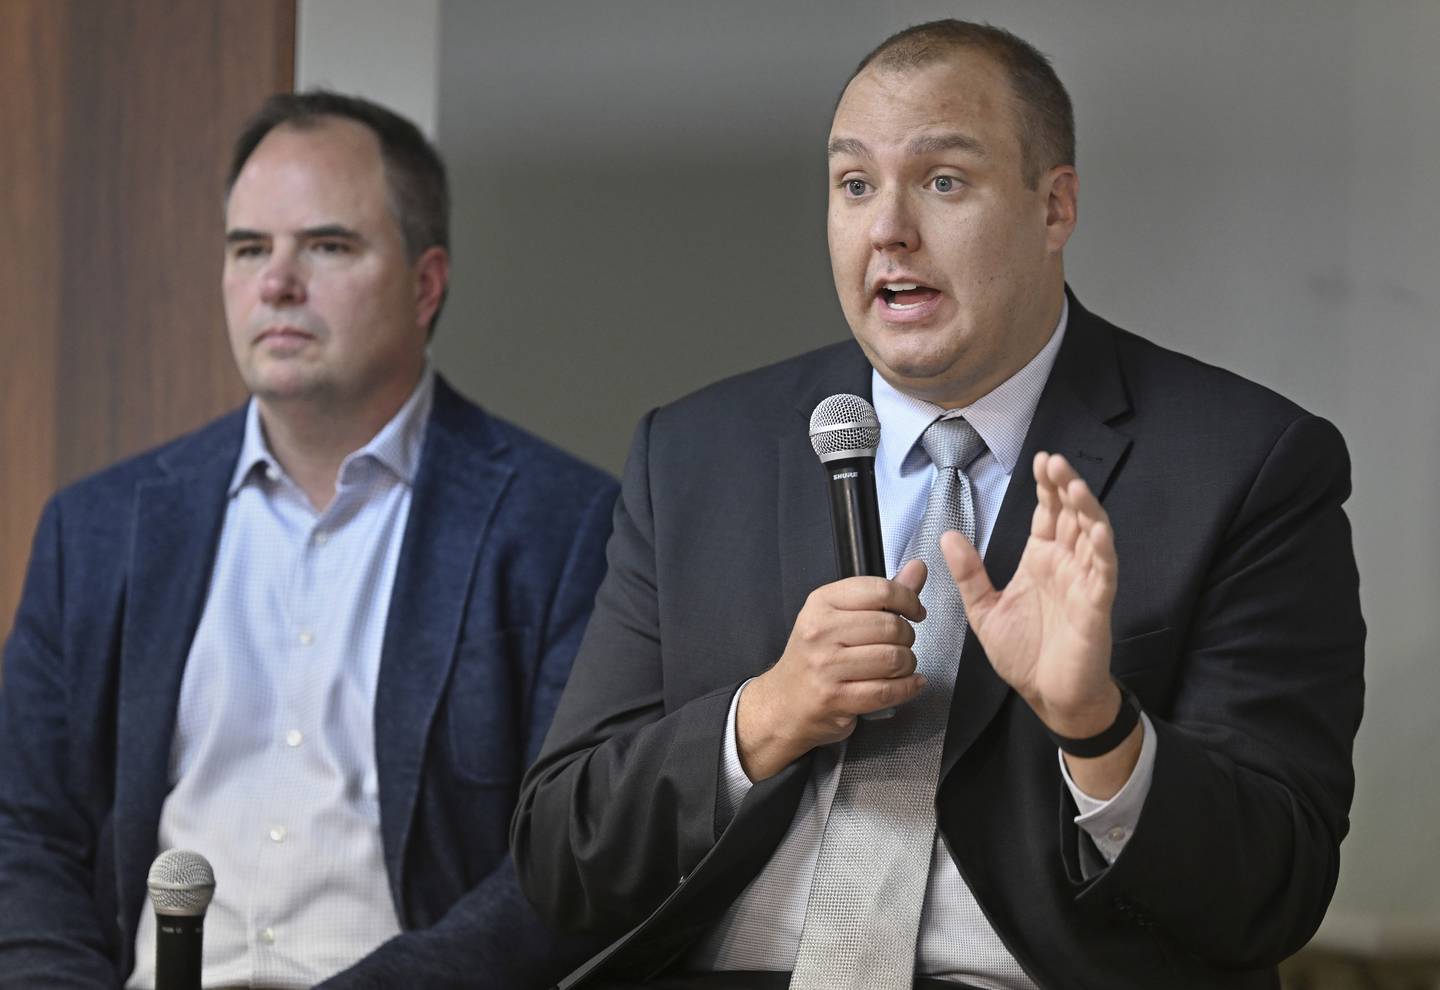 Brian Costin, deputy state director for Americans for Prosperity - Illinois speaks during a “debate” held at the Heartland Institute’s Andrew Breitbart Freedom Center on Sept. 28, 2022.